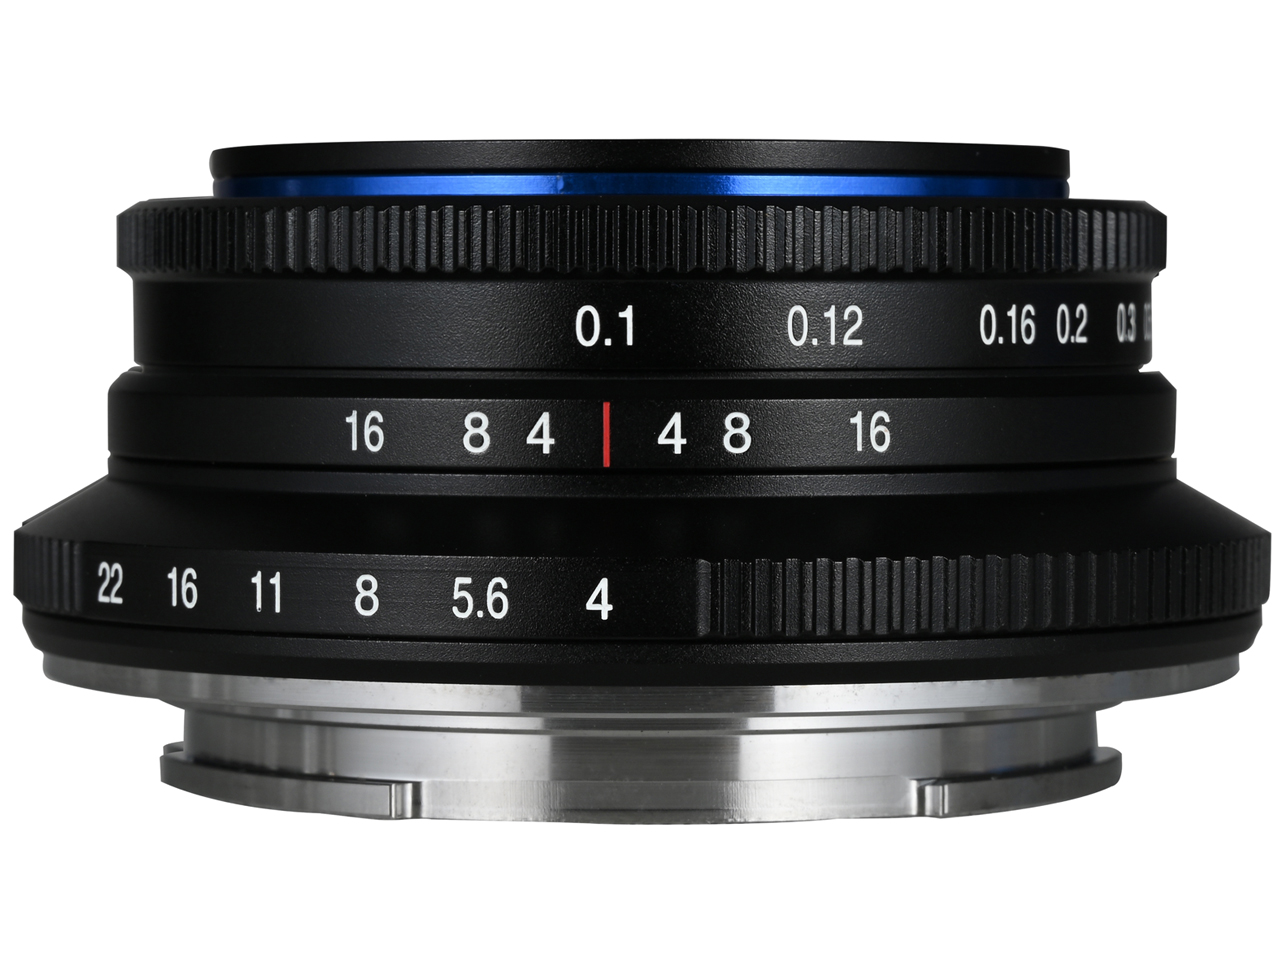 LAOWA 10mm F4 Cookie [ライカL用]